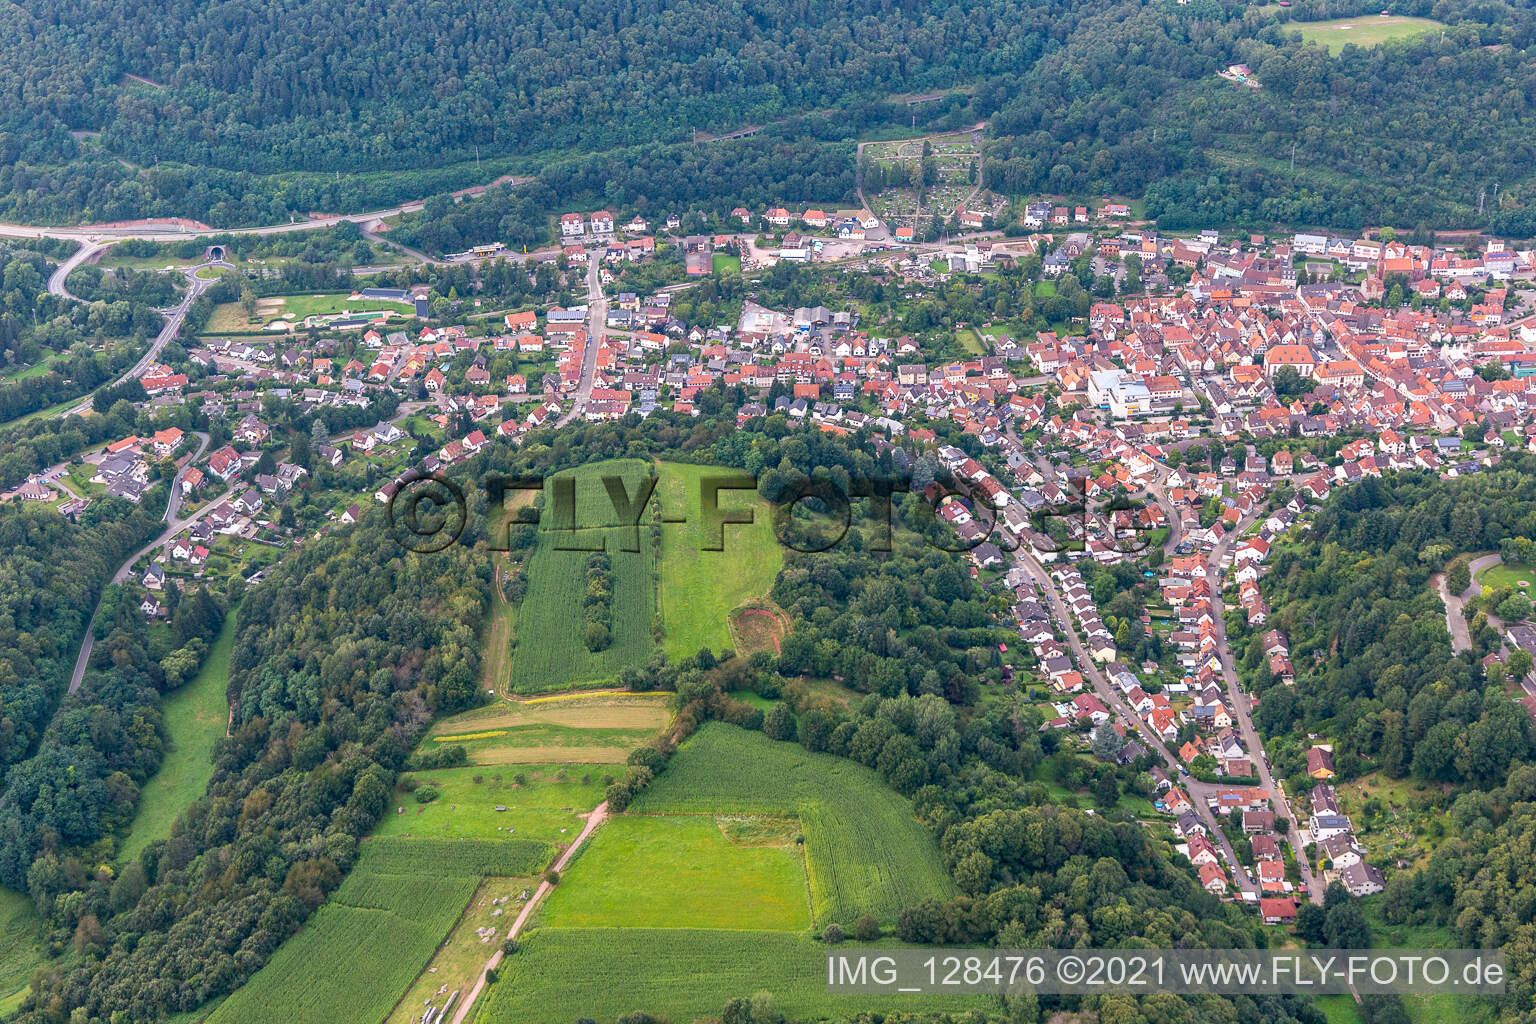 Drone recording of Annweiler am Trifels in the state Rhineland-Palatinate, Germany